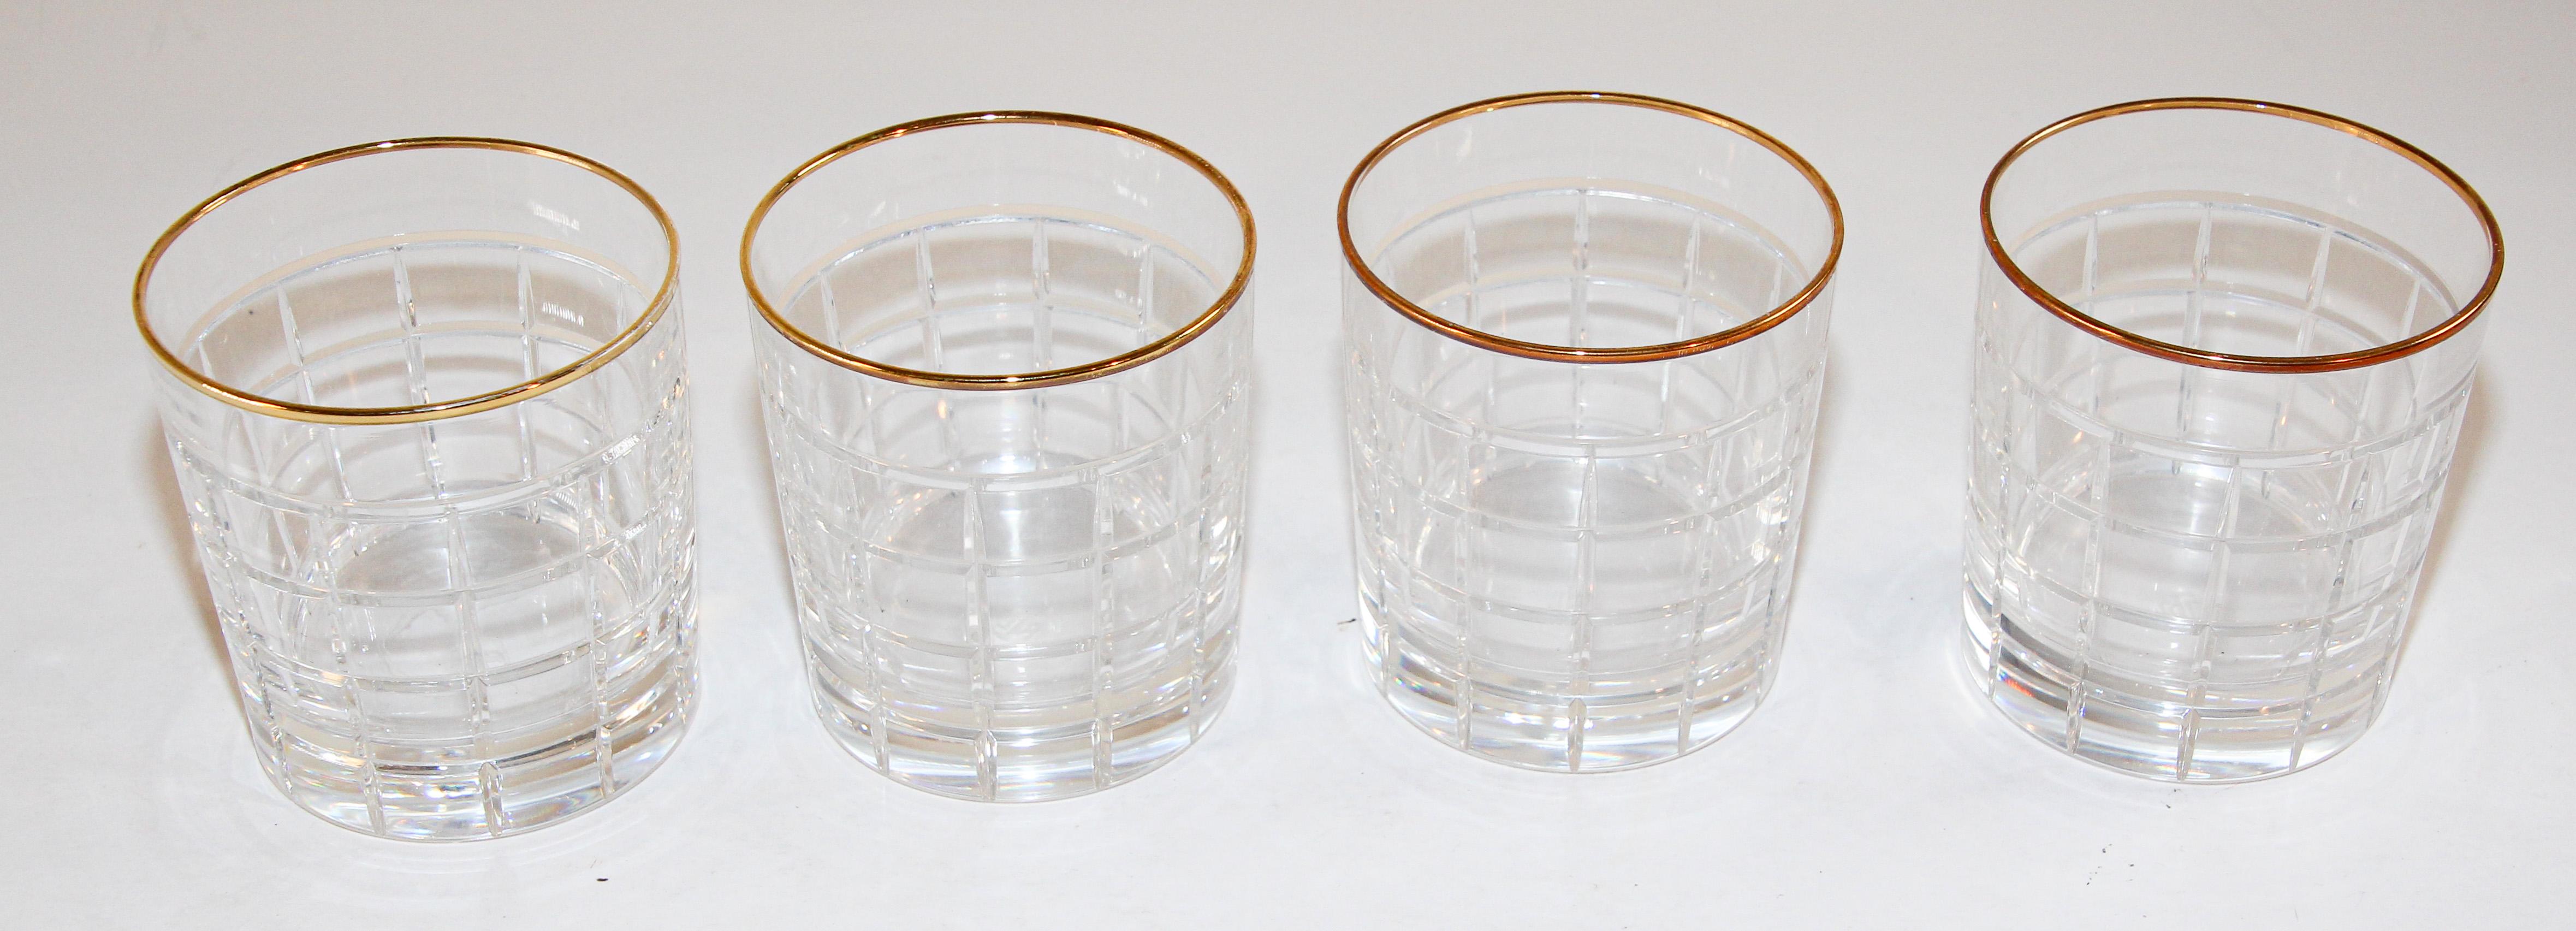 Unknown Set of Cut Crystal Double Old-Fashioned Whiskey Glasses by Ralph Lauren